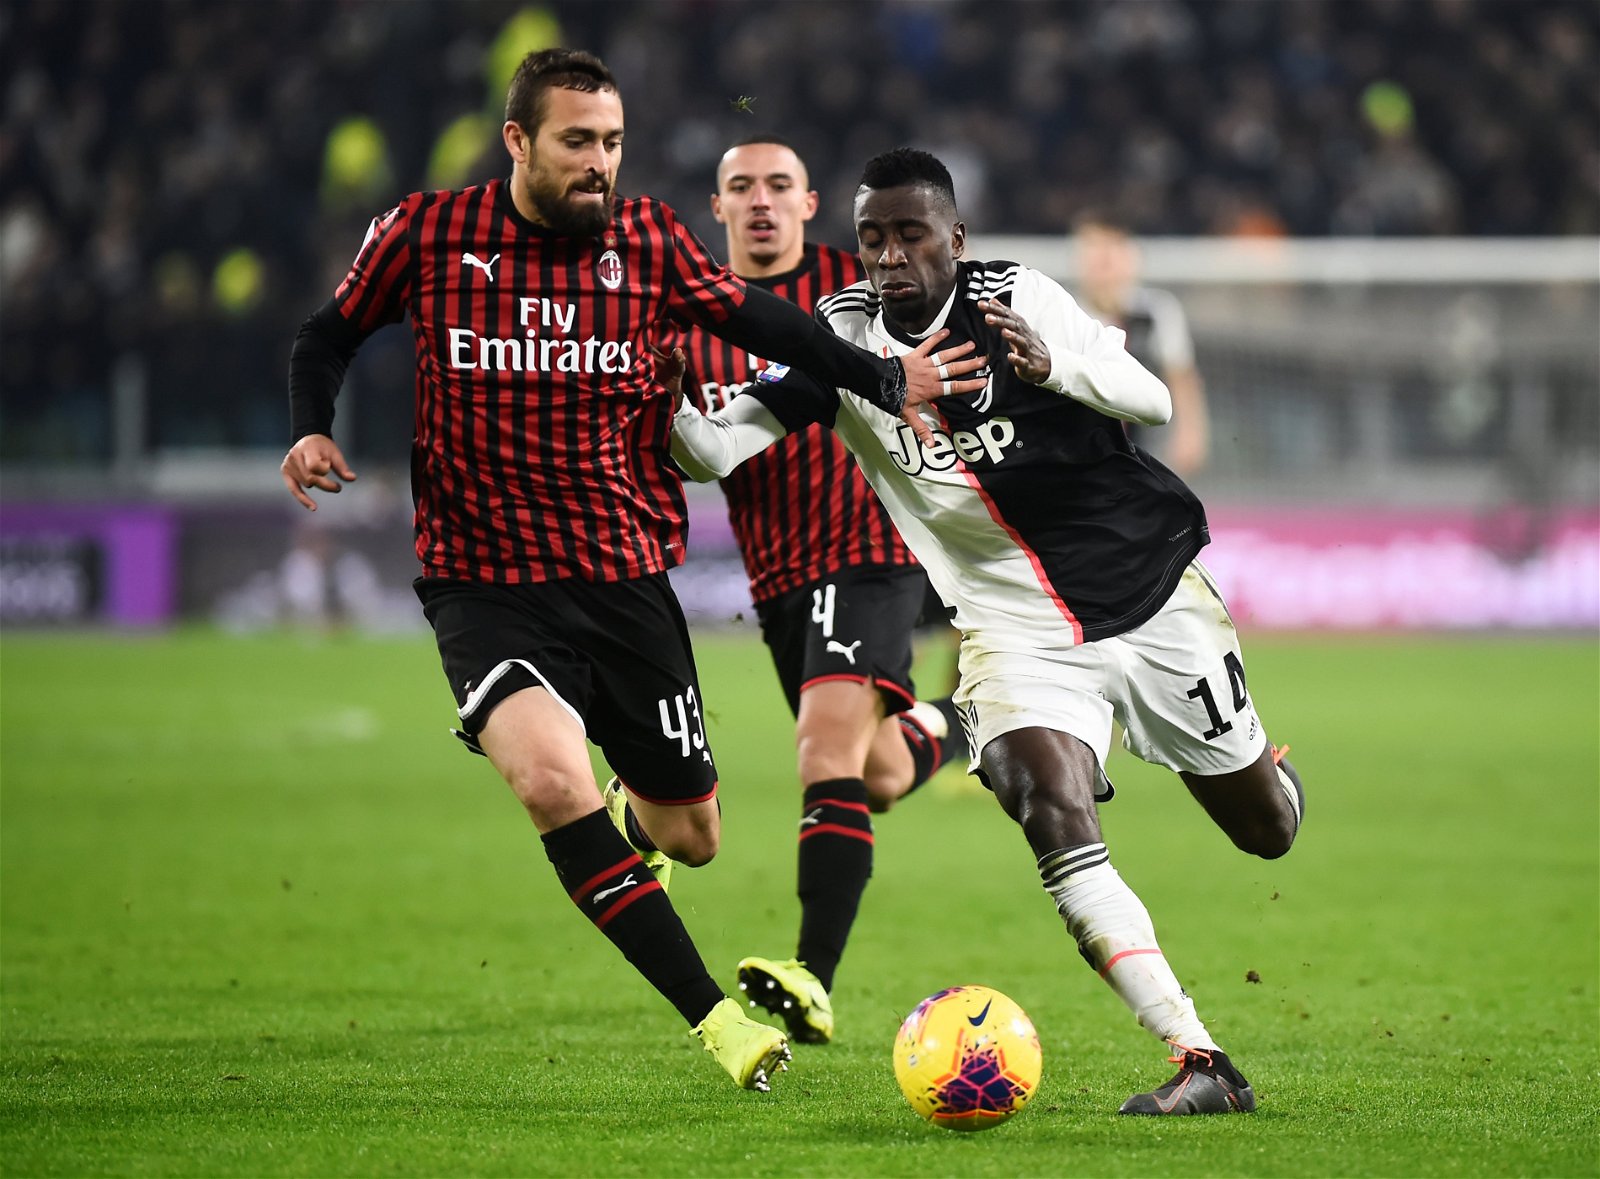 AC Milan defender Leo Duarte to miss 3-4 months of action with injury